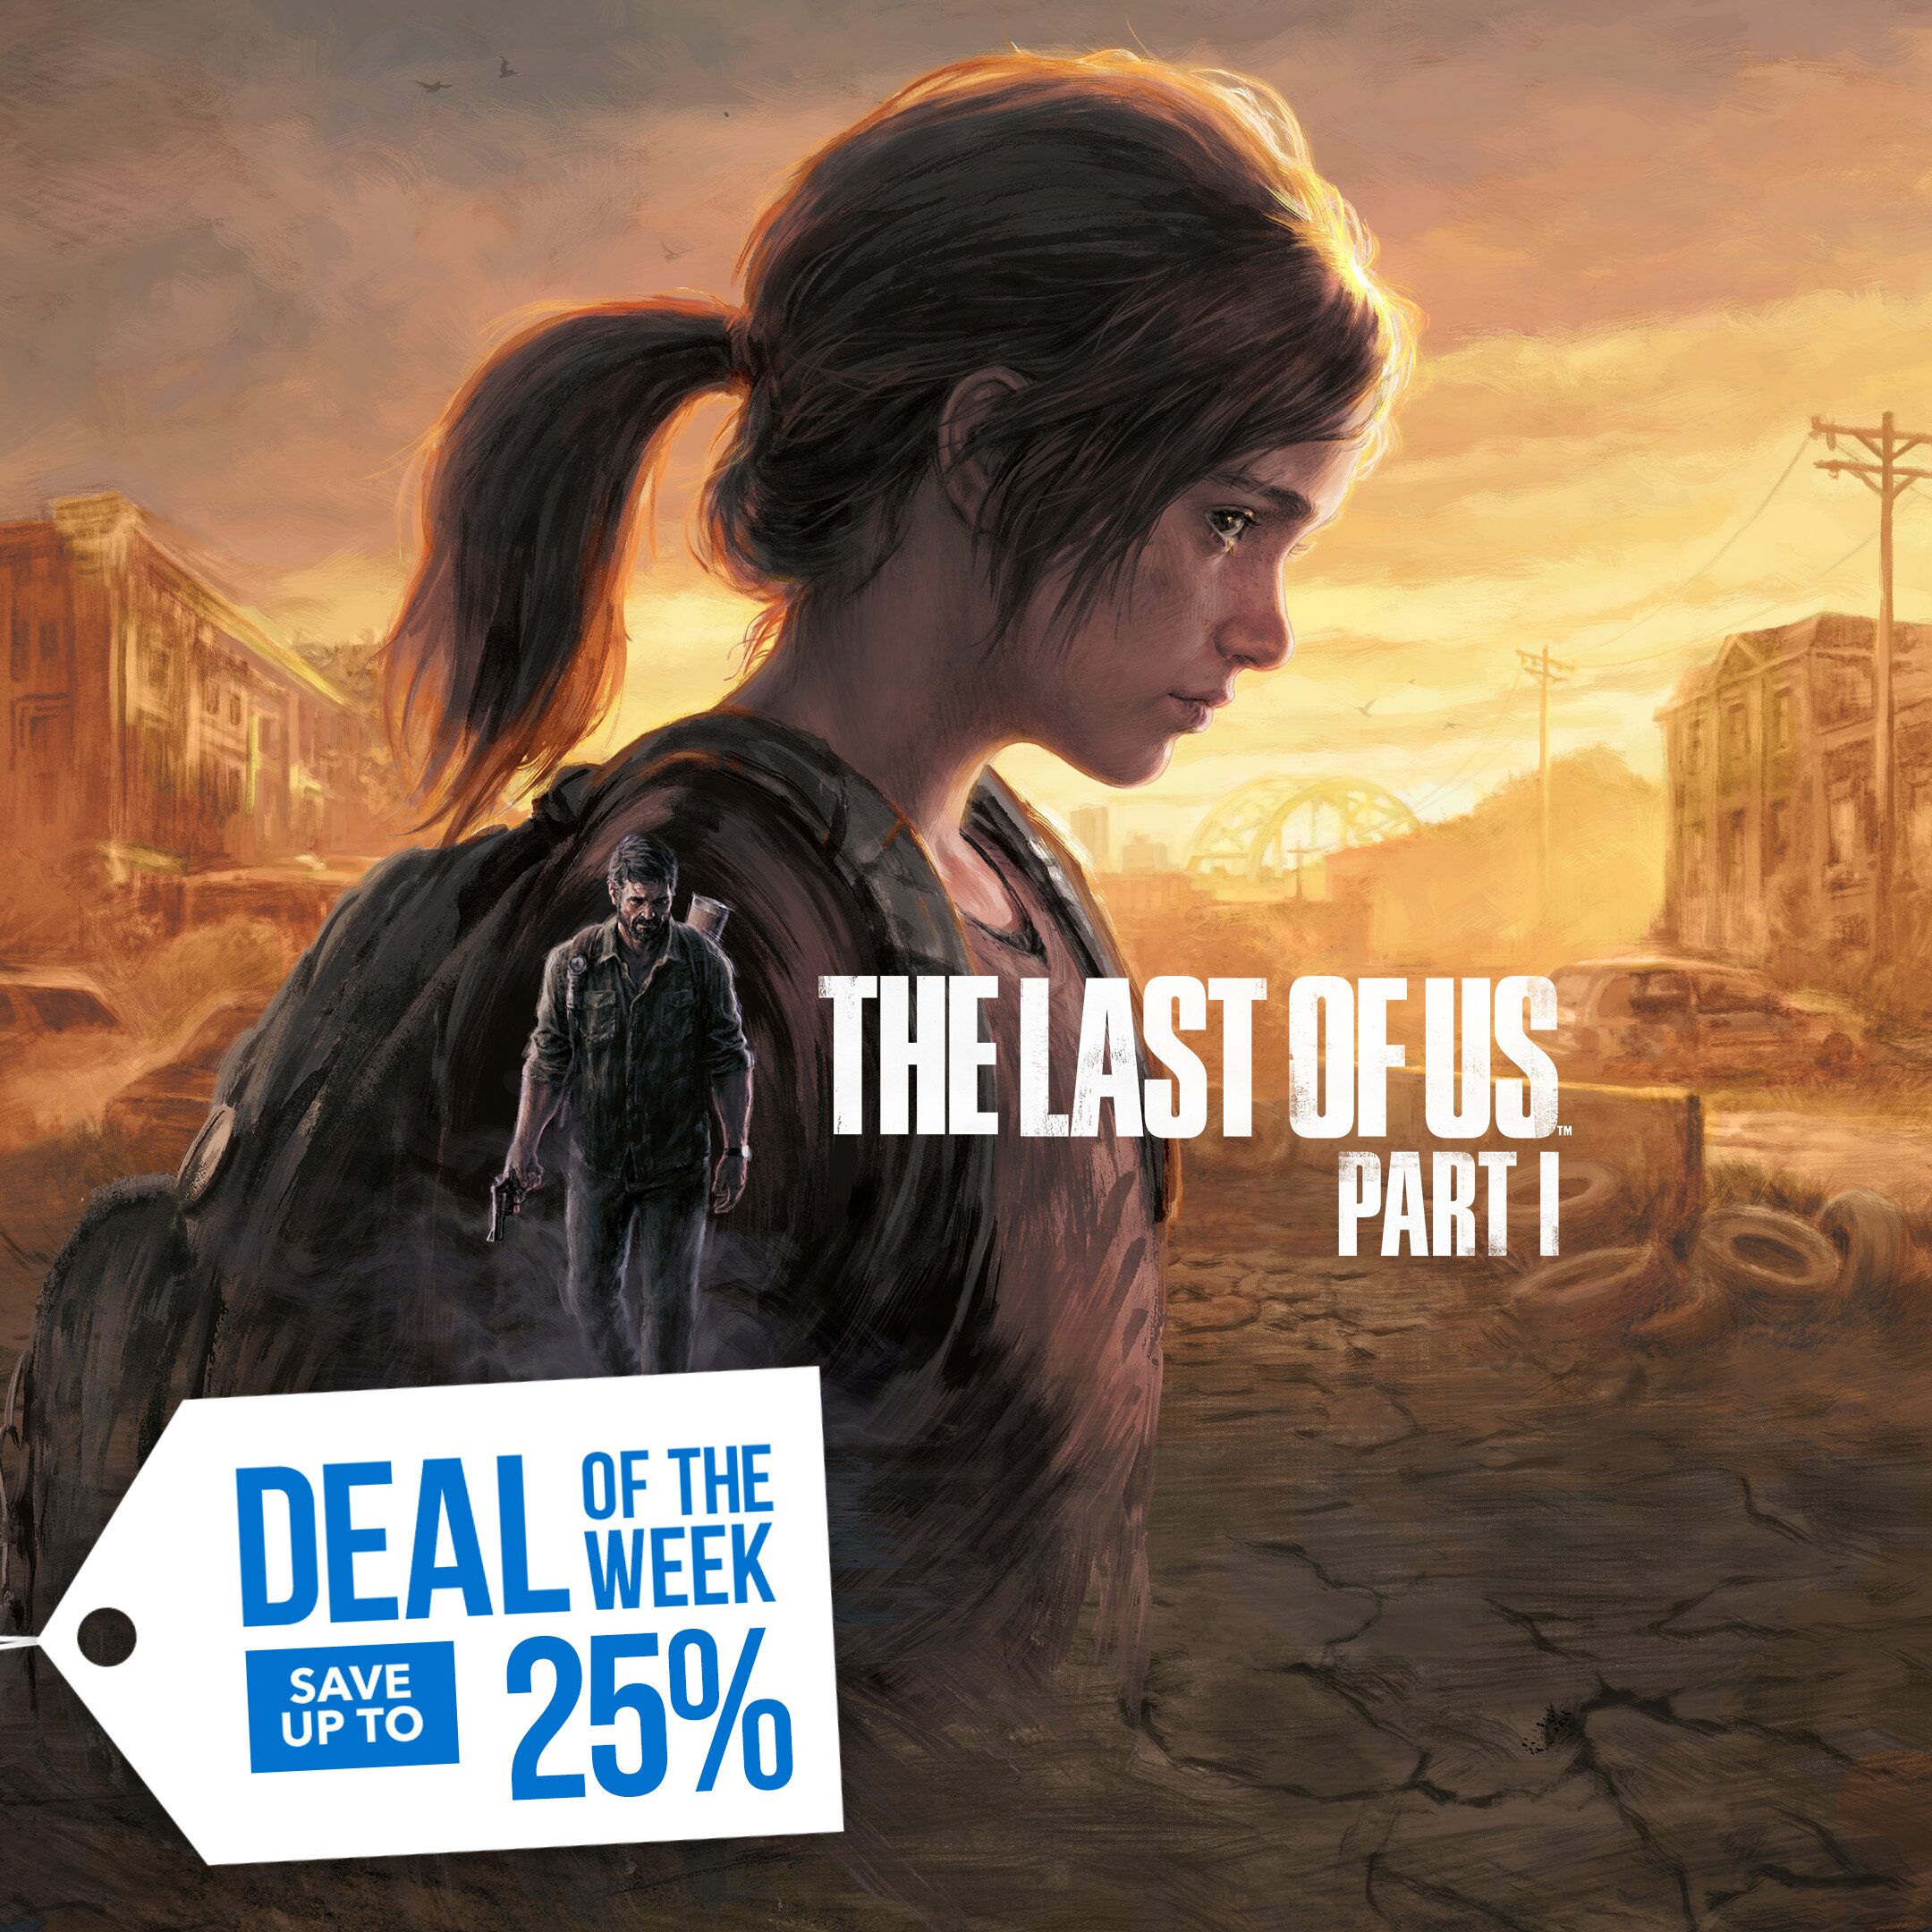 [PROMO] Deal of the Week 2/8 - The Last of Us Franchise - TD